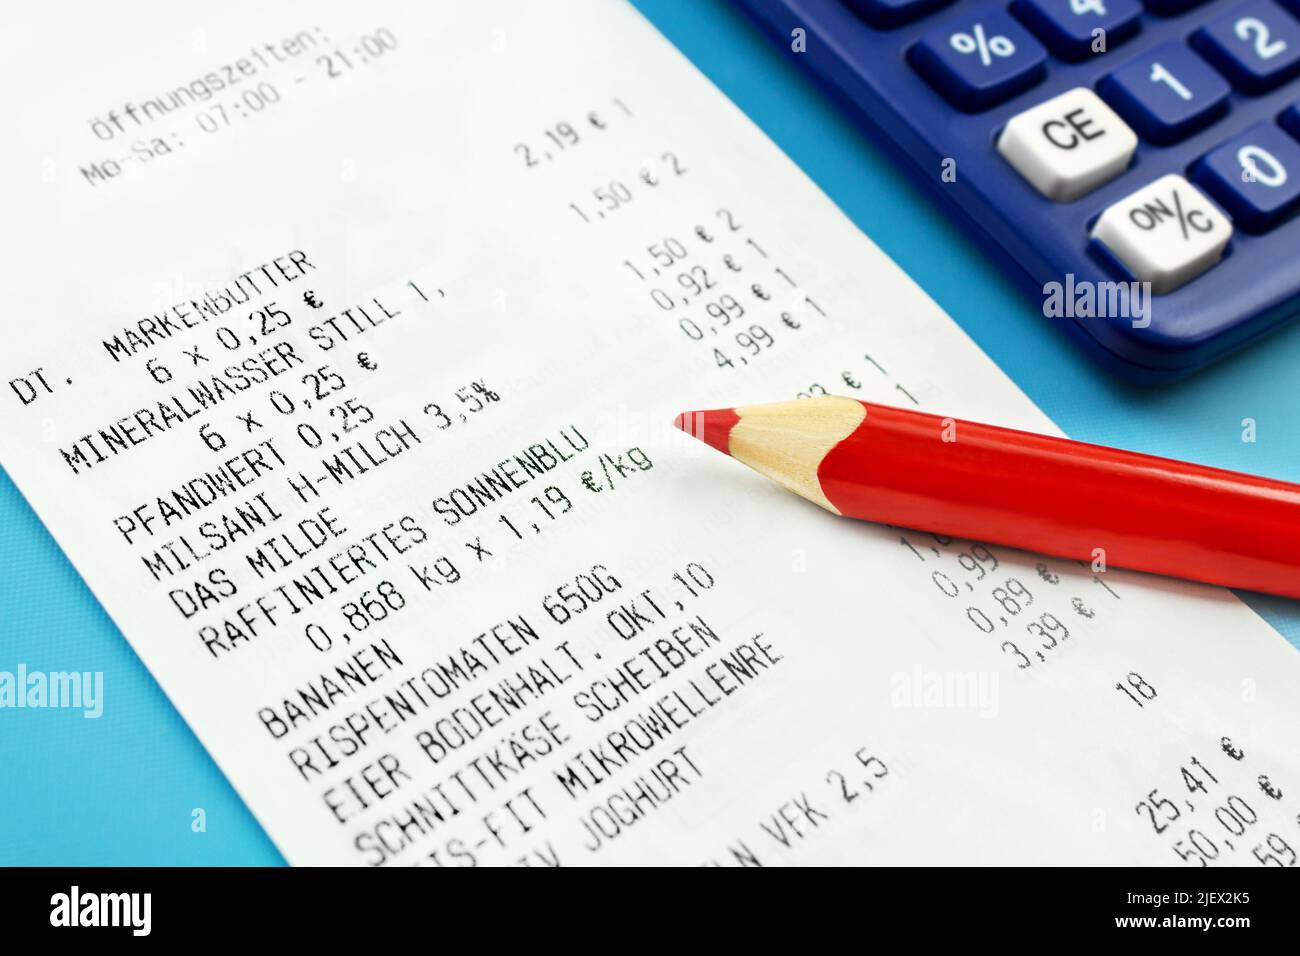 German purchase voucher staple foods with calculator and red pencil Stock Photo